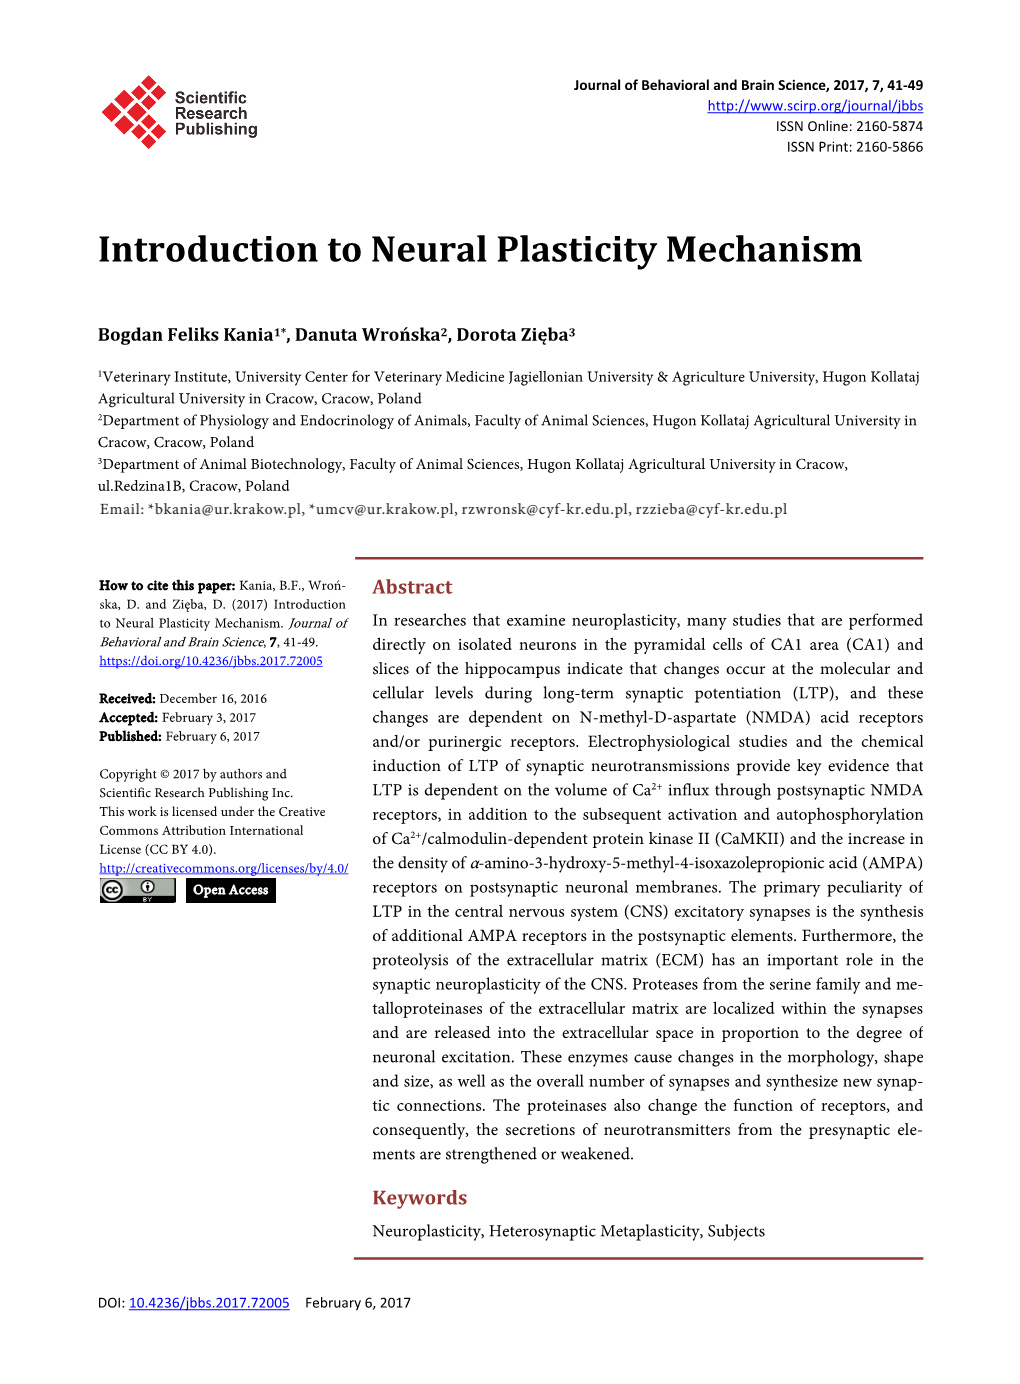 Introduction to Neural Plasticity Mechanism